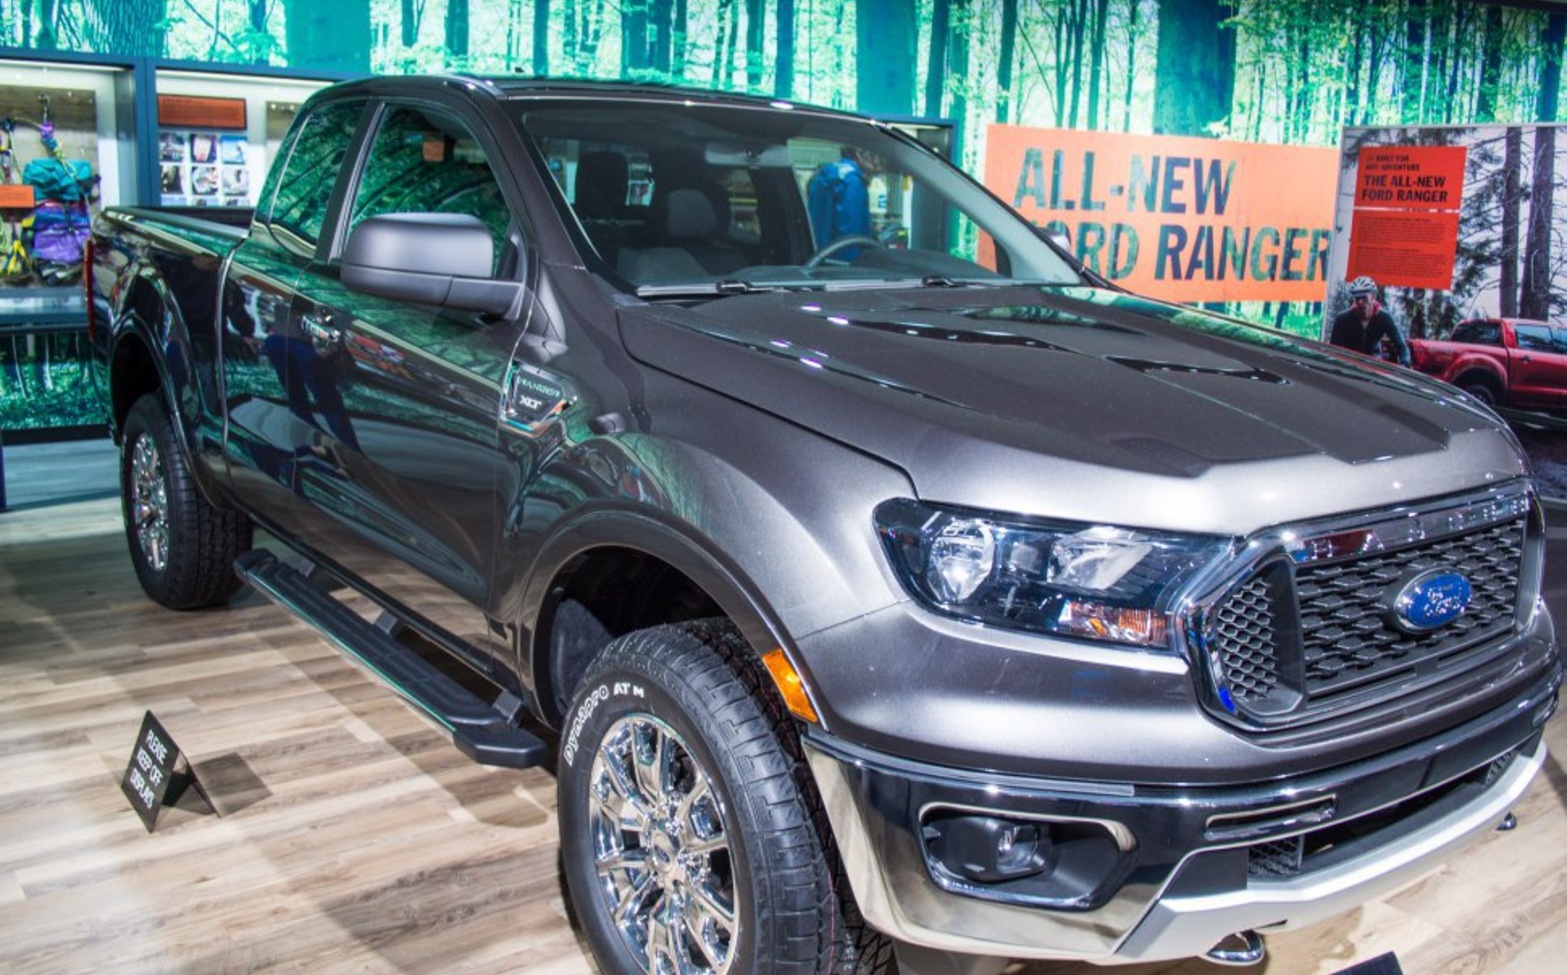 Ford Ranger IV SuperCab (Americas) 2.3 EcoBoost (270 Hp) Automatic 2019, 2020, 2021 